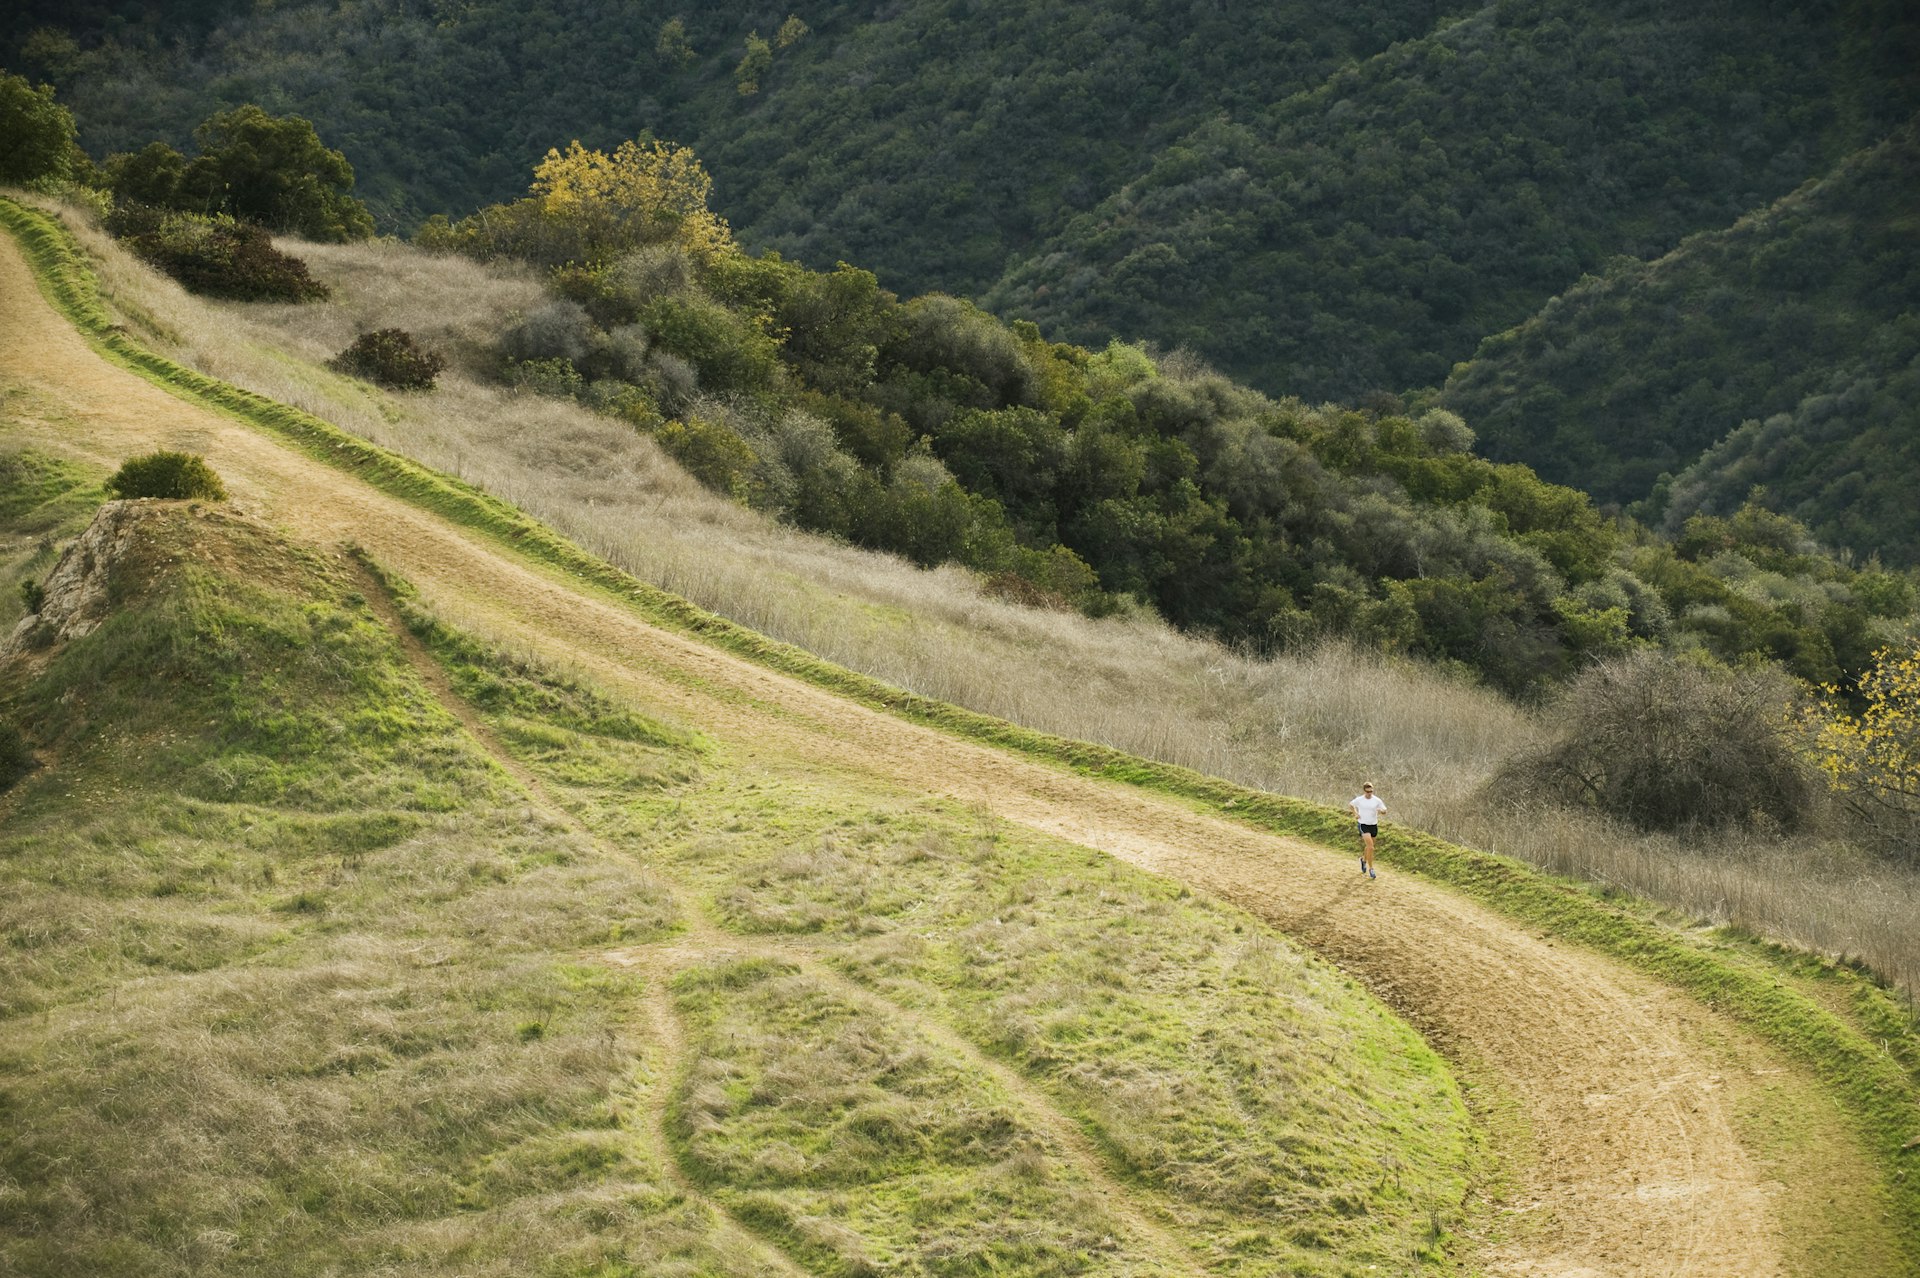 A runner jogs along a green and wooded hilly part of the Cistern Trail, Malibu